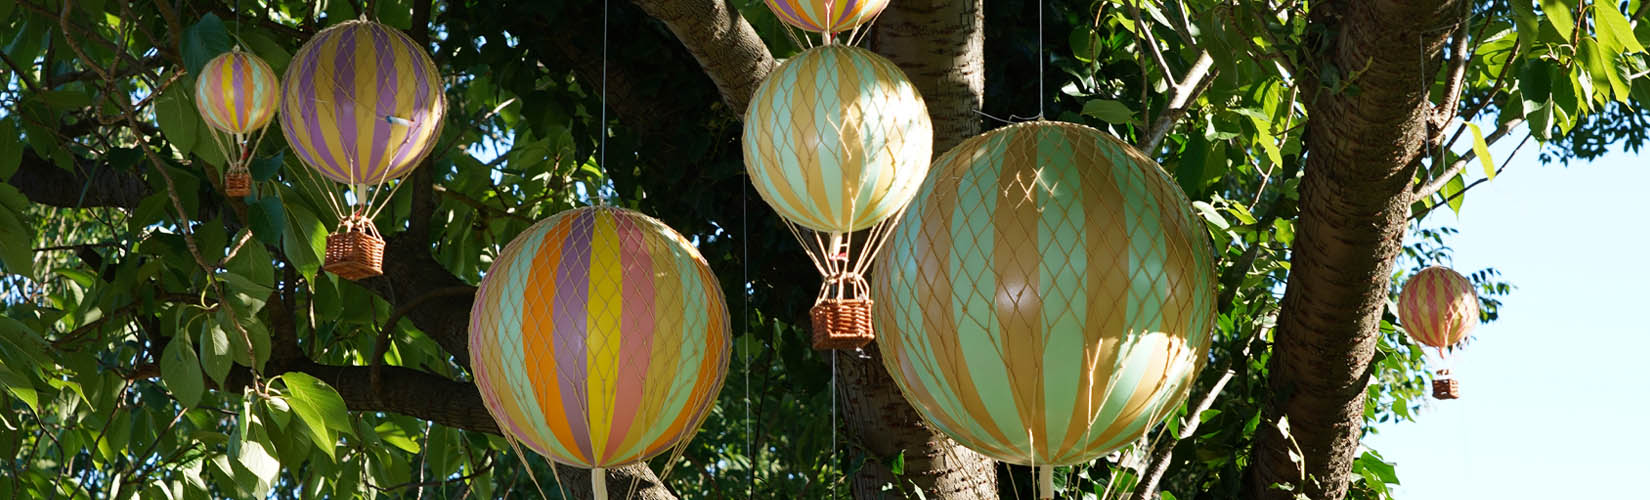 Our Best-Selling Model Hot Air Balloons & How To Style Them